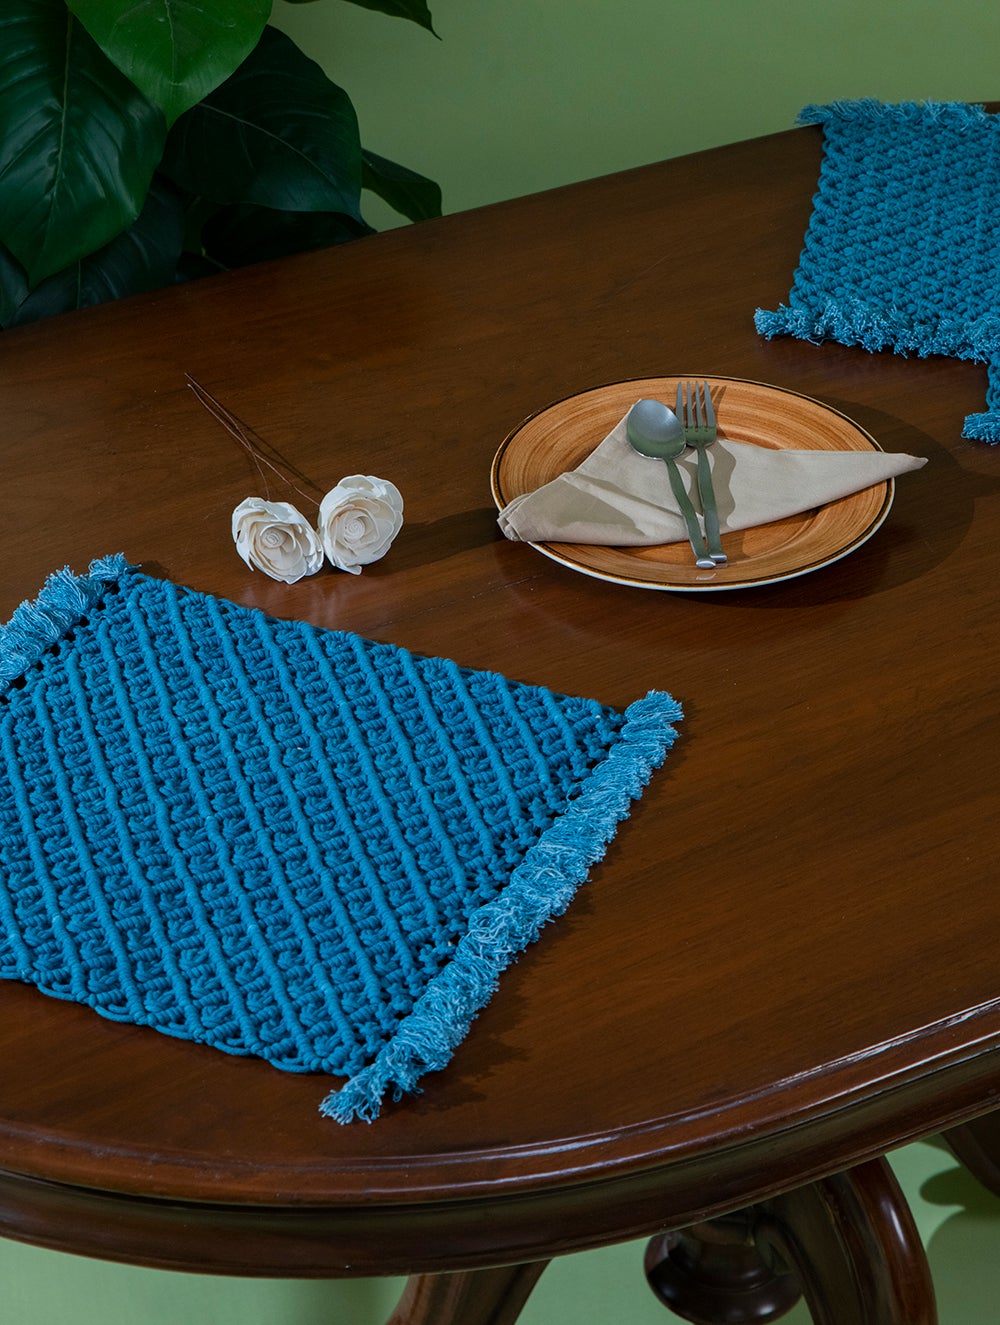 Load image into Gallery viewer, Jewel Handknotted Macramé Table Mats - Teal Blue (Set of 4)